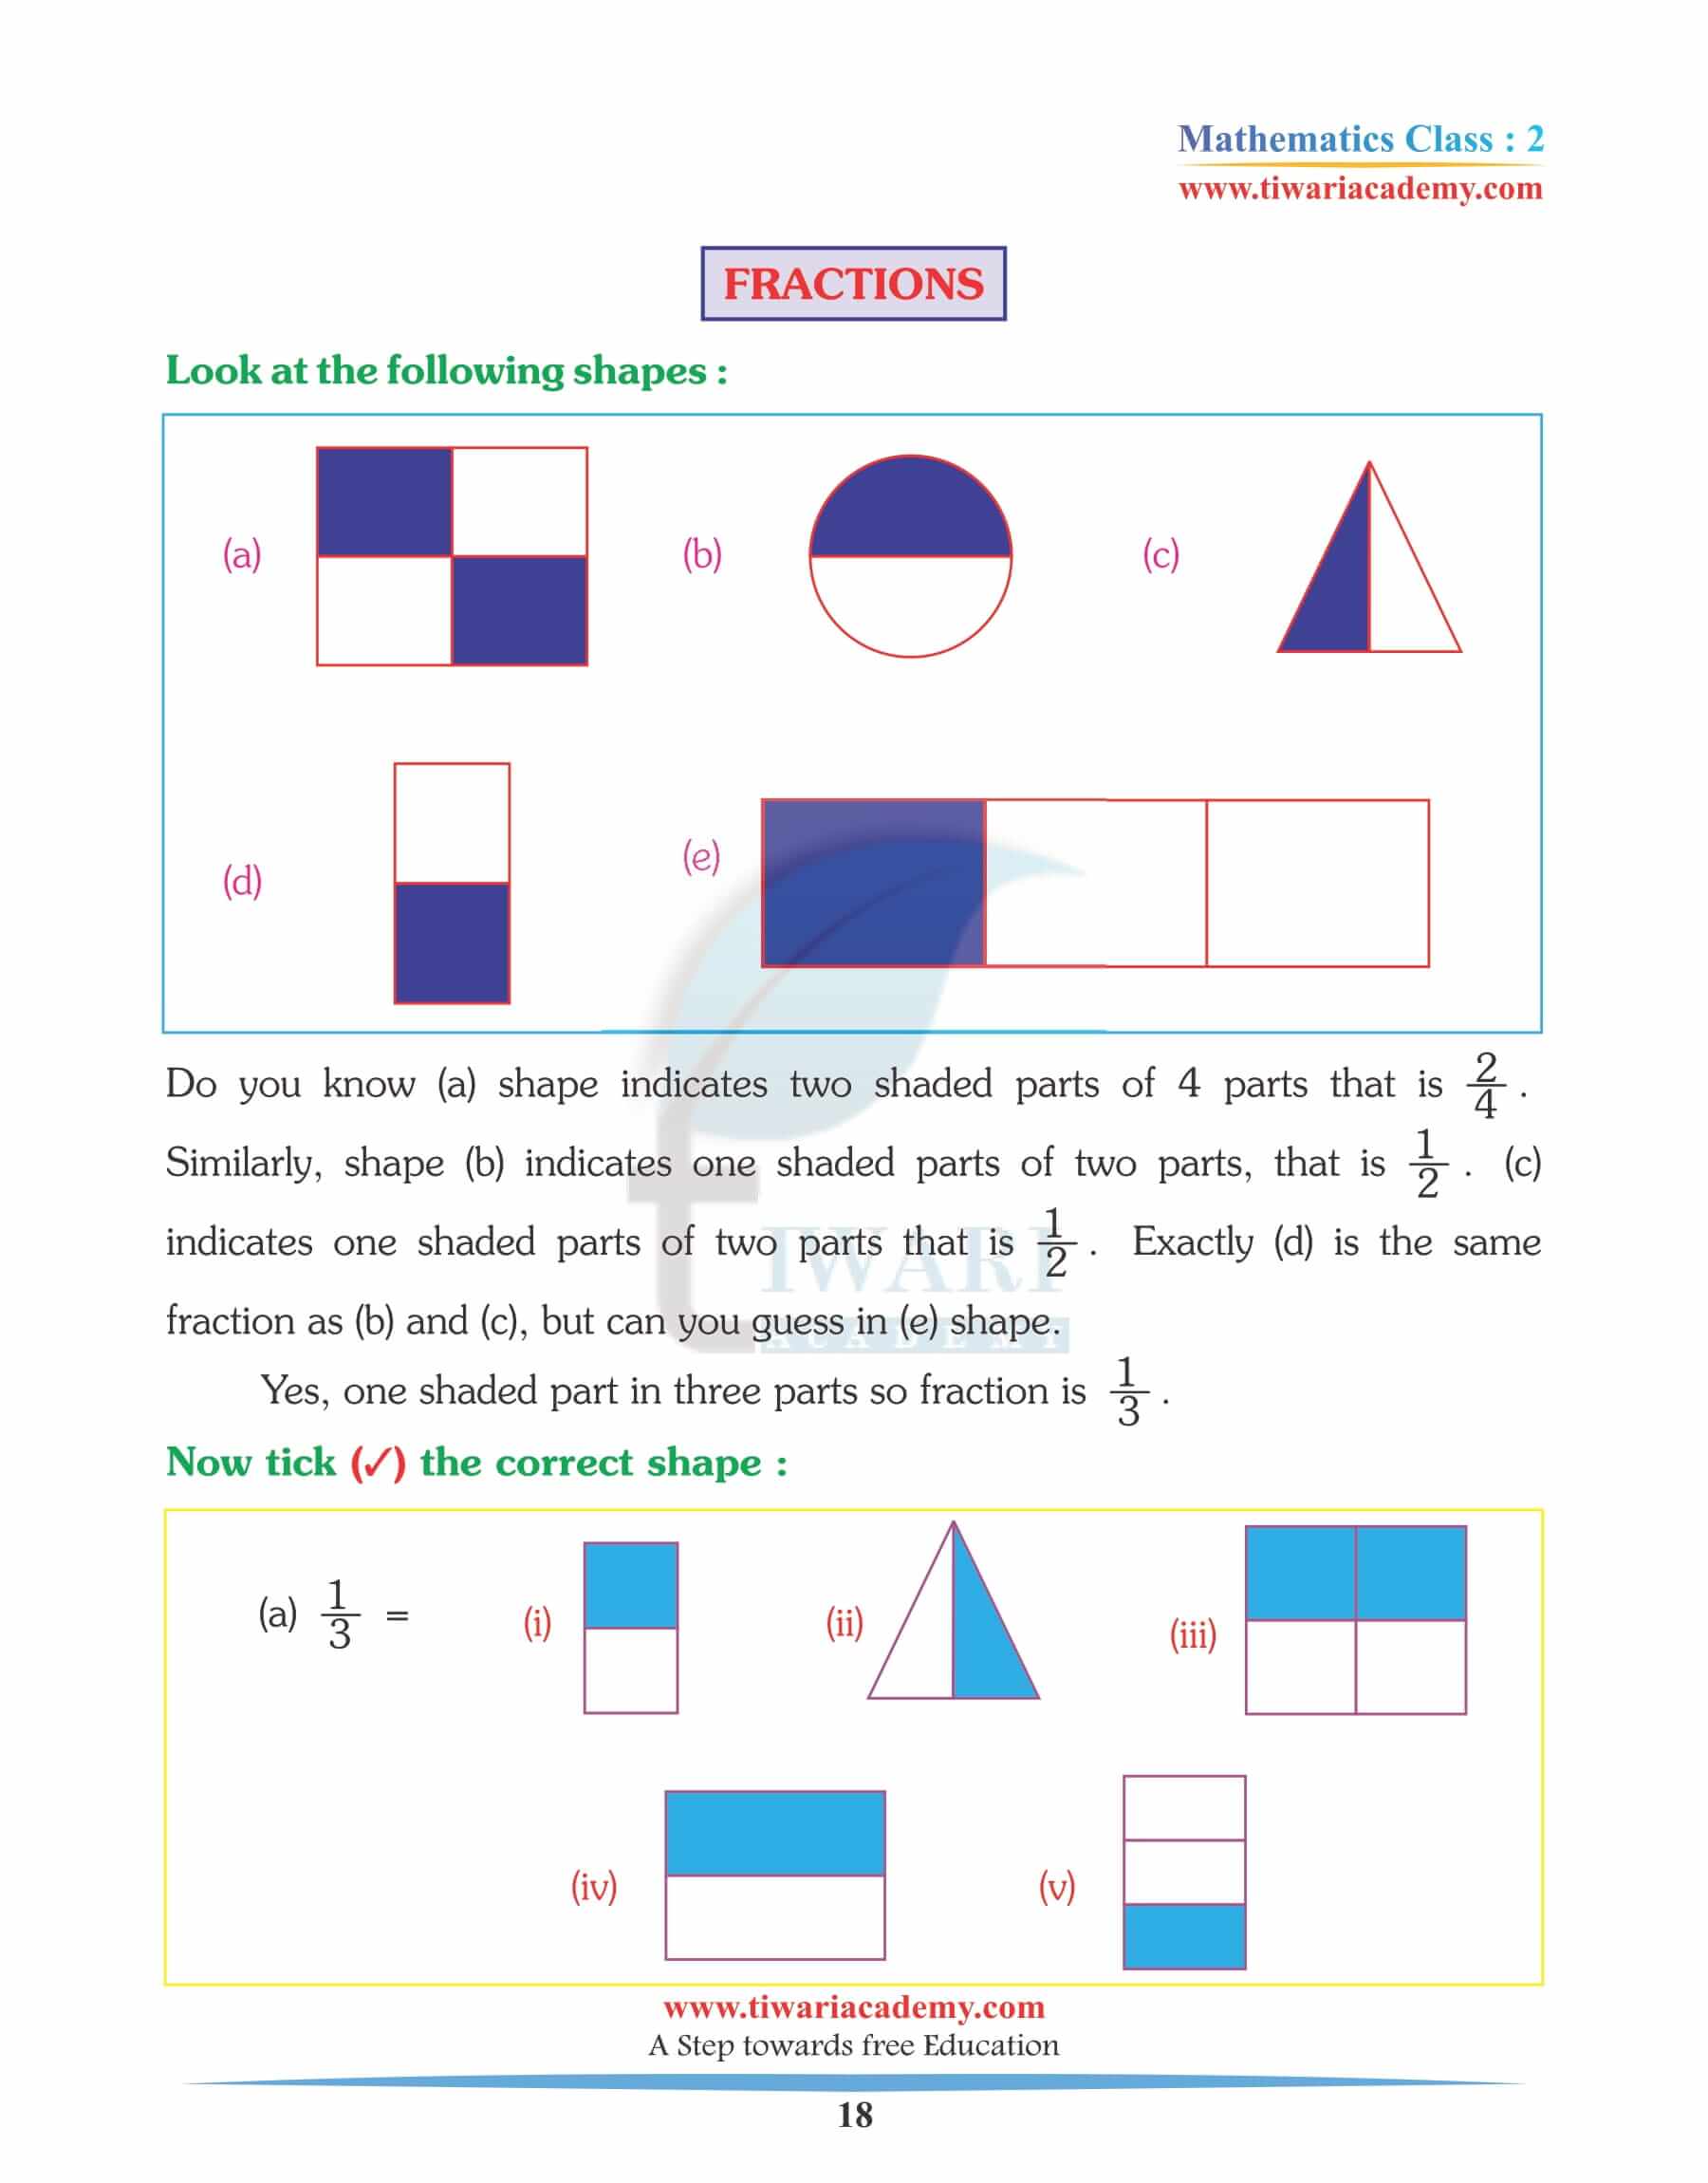 Grade 2 Maths Chapter 2 Revision exercises